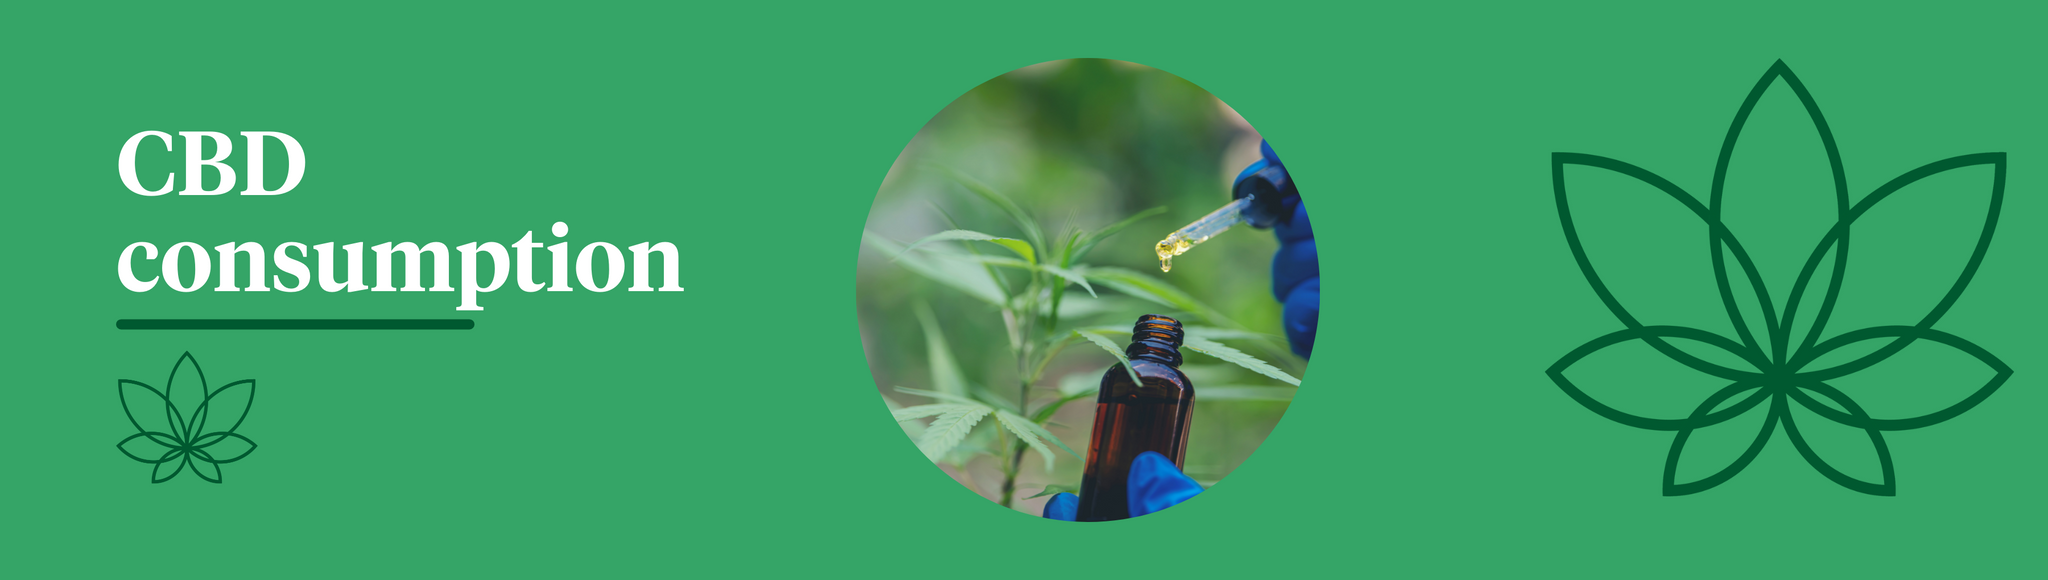 A green background with the Supreme CBD logo to the right and a person injecting CBD oil into a small jar for consumption.